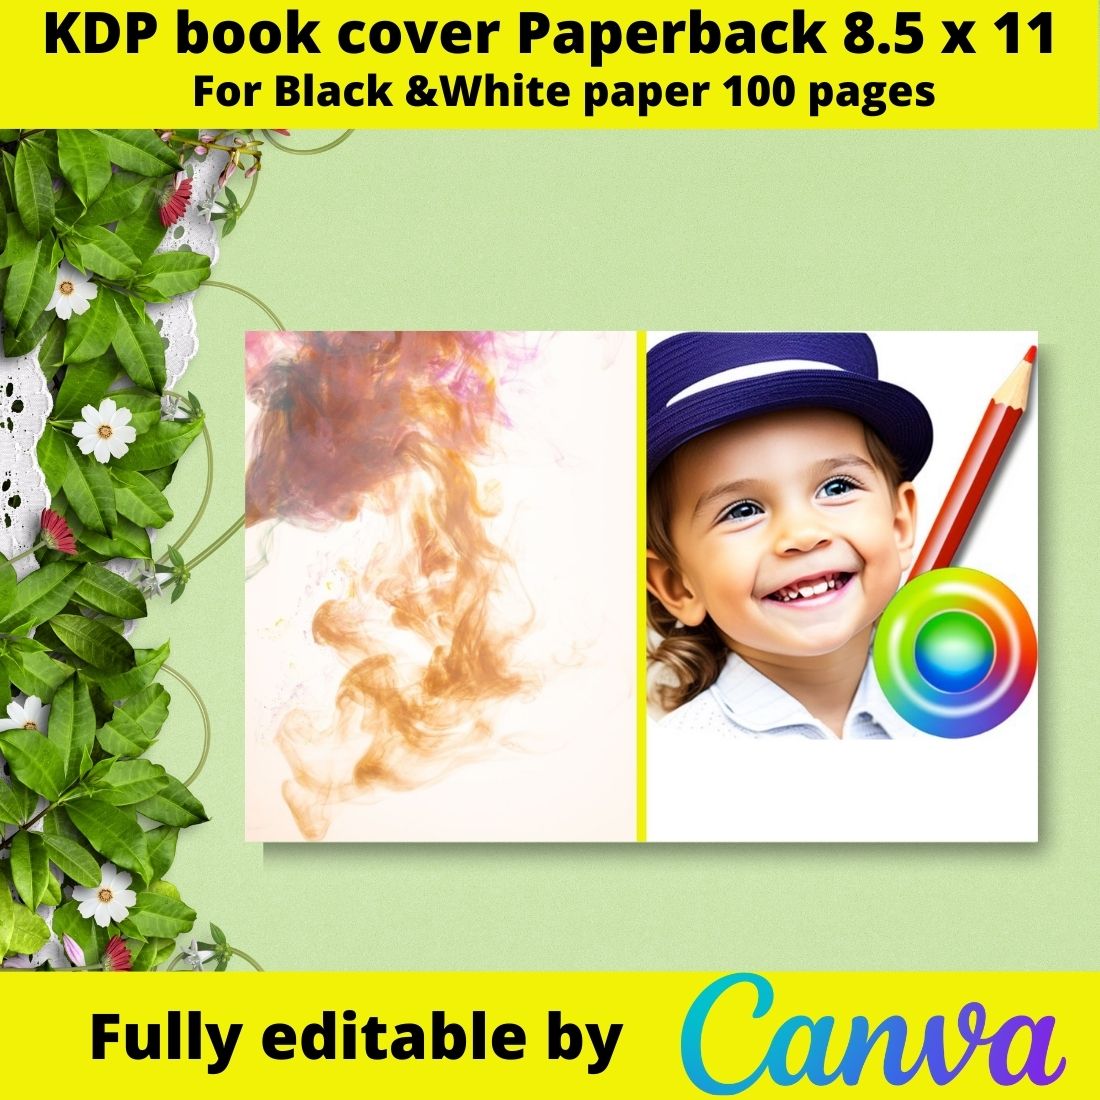 Get a KDP book cover that appeals to kids and parents alike preview image.